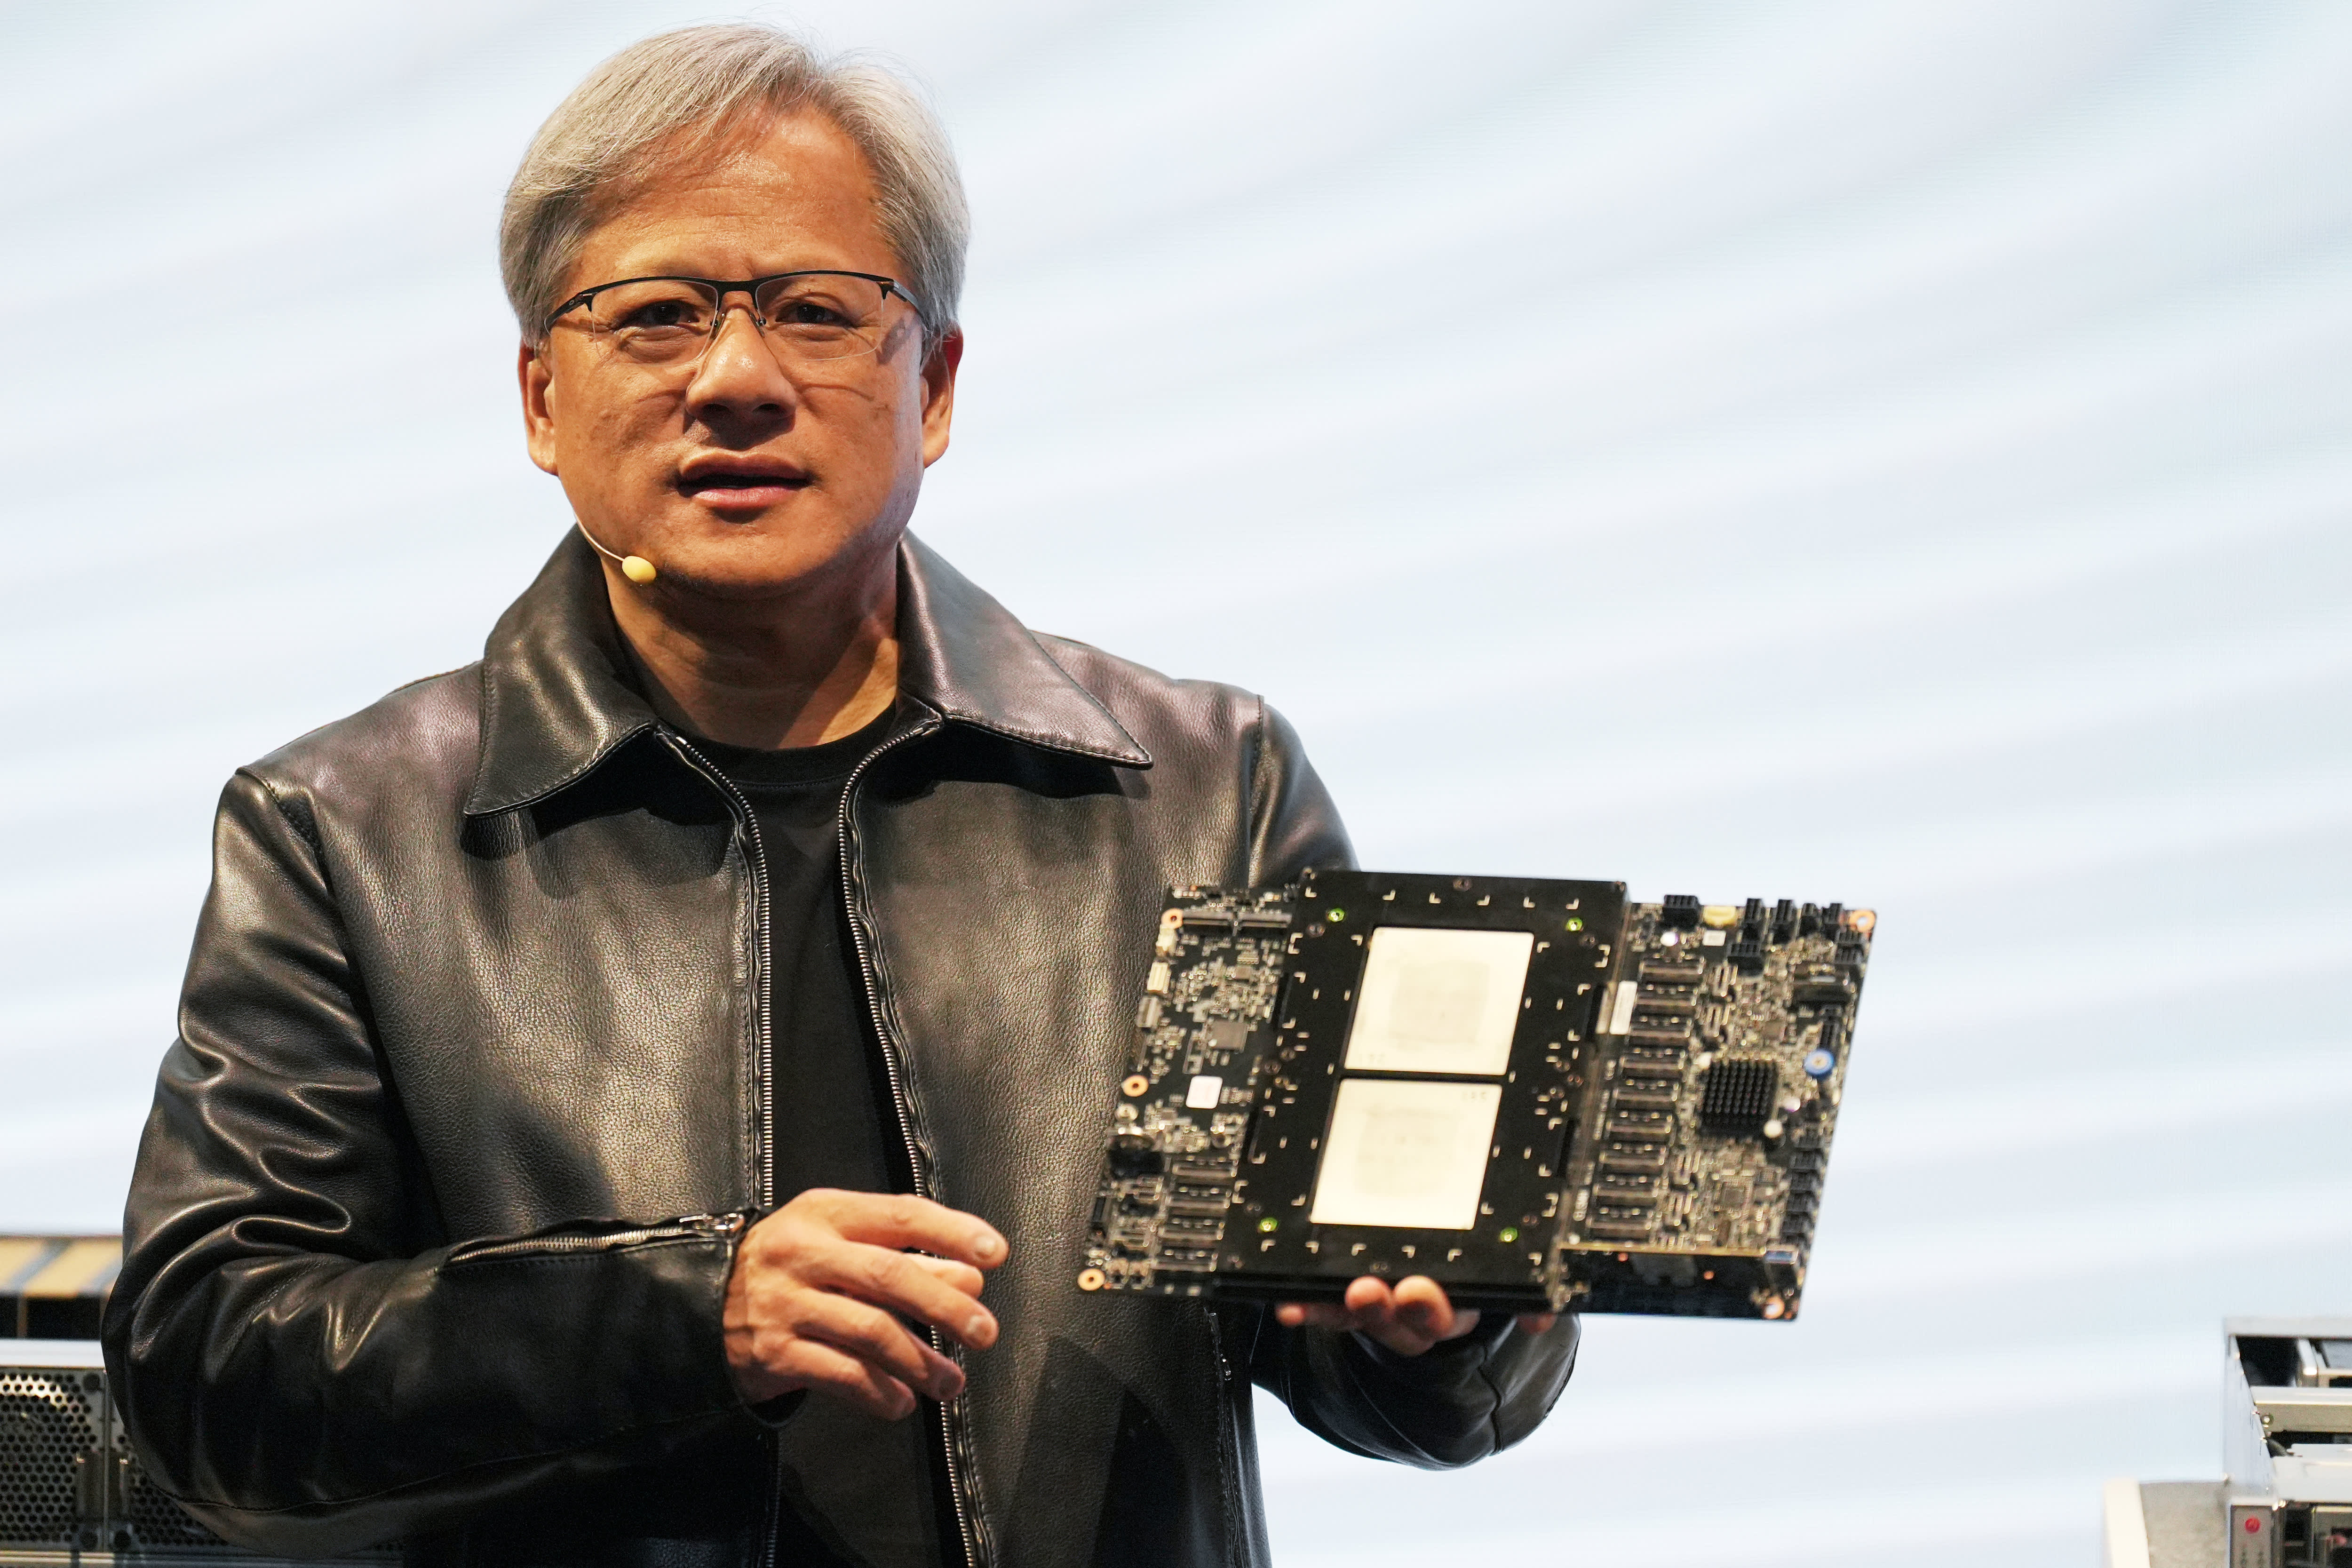 Jensen Huang started Nvidia at a Denny’s breakfast booth